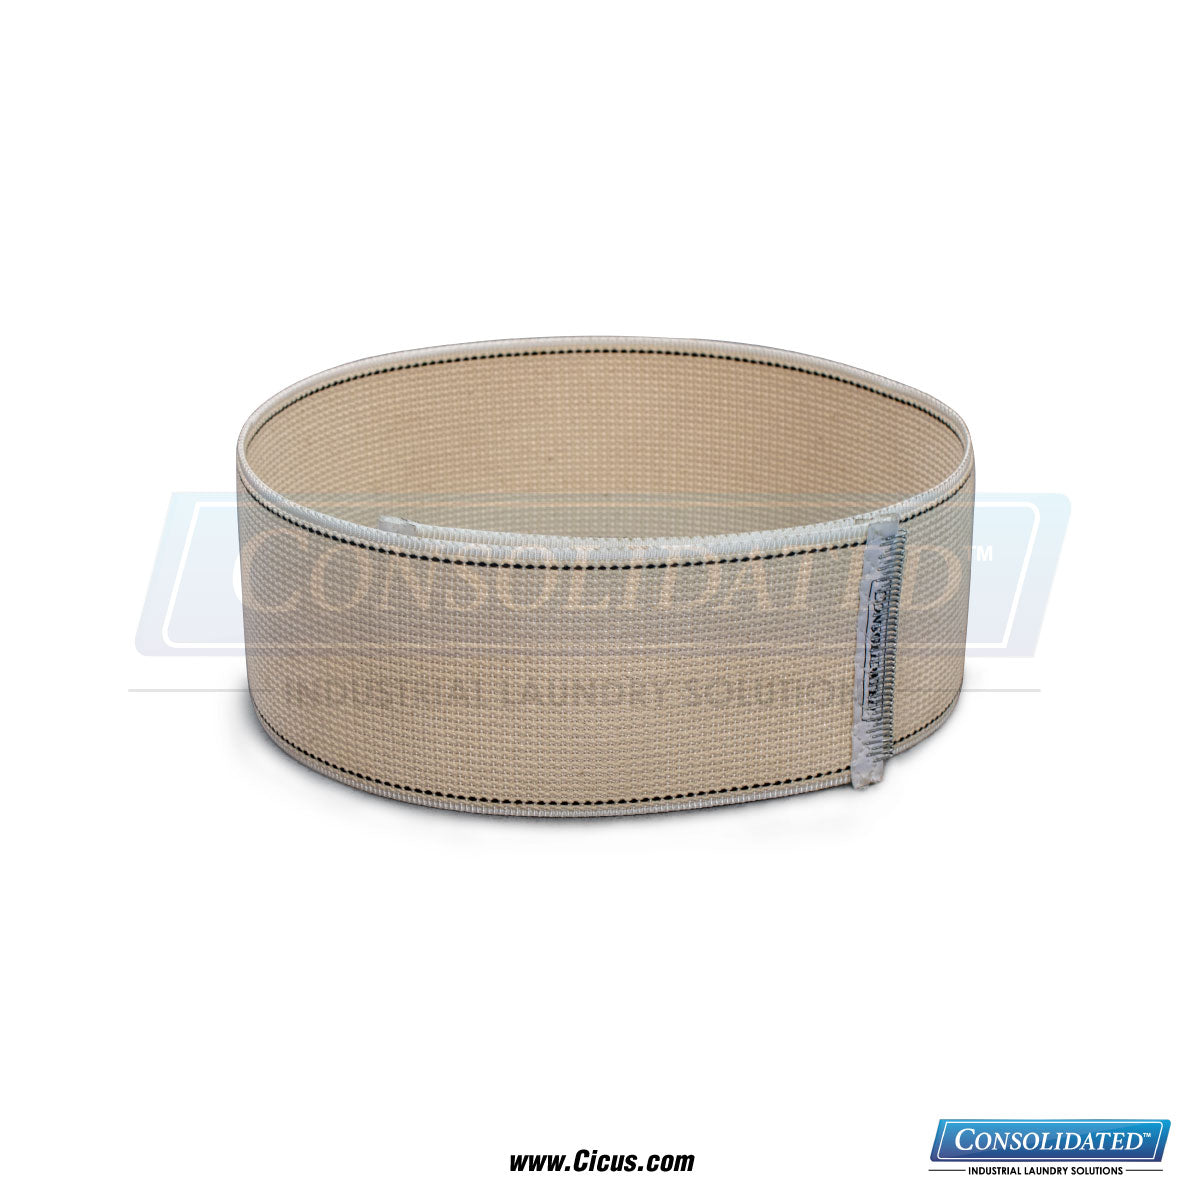 CIC Exclusive Chicago Dryer Canvas Ribbon - 1" x 91" (1001-129)